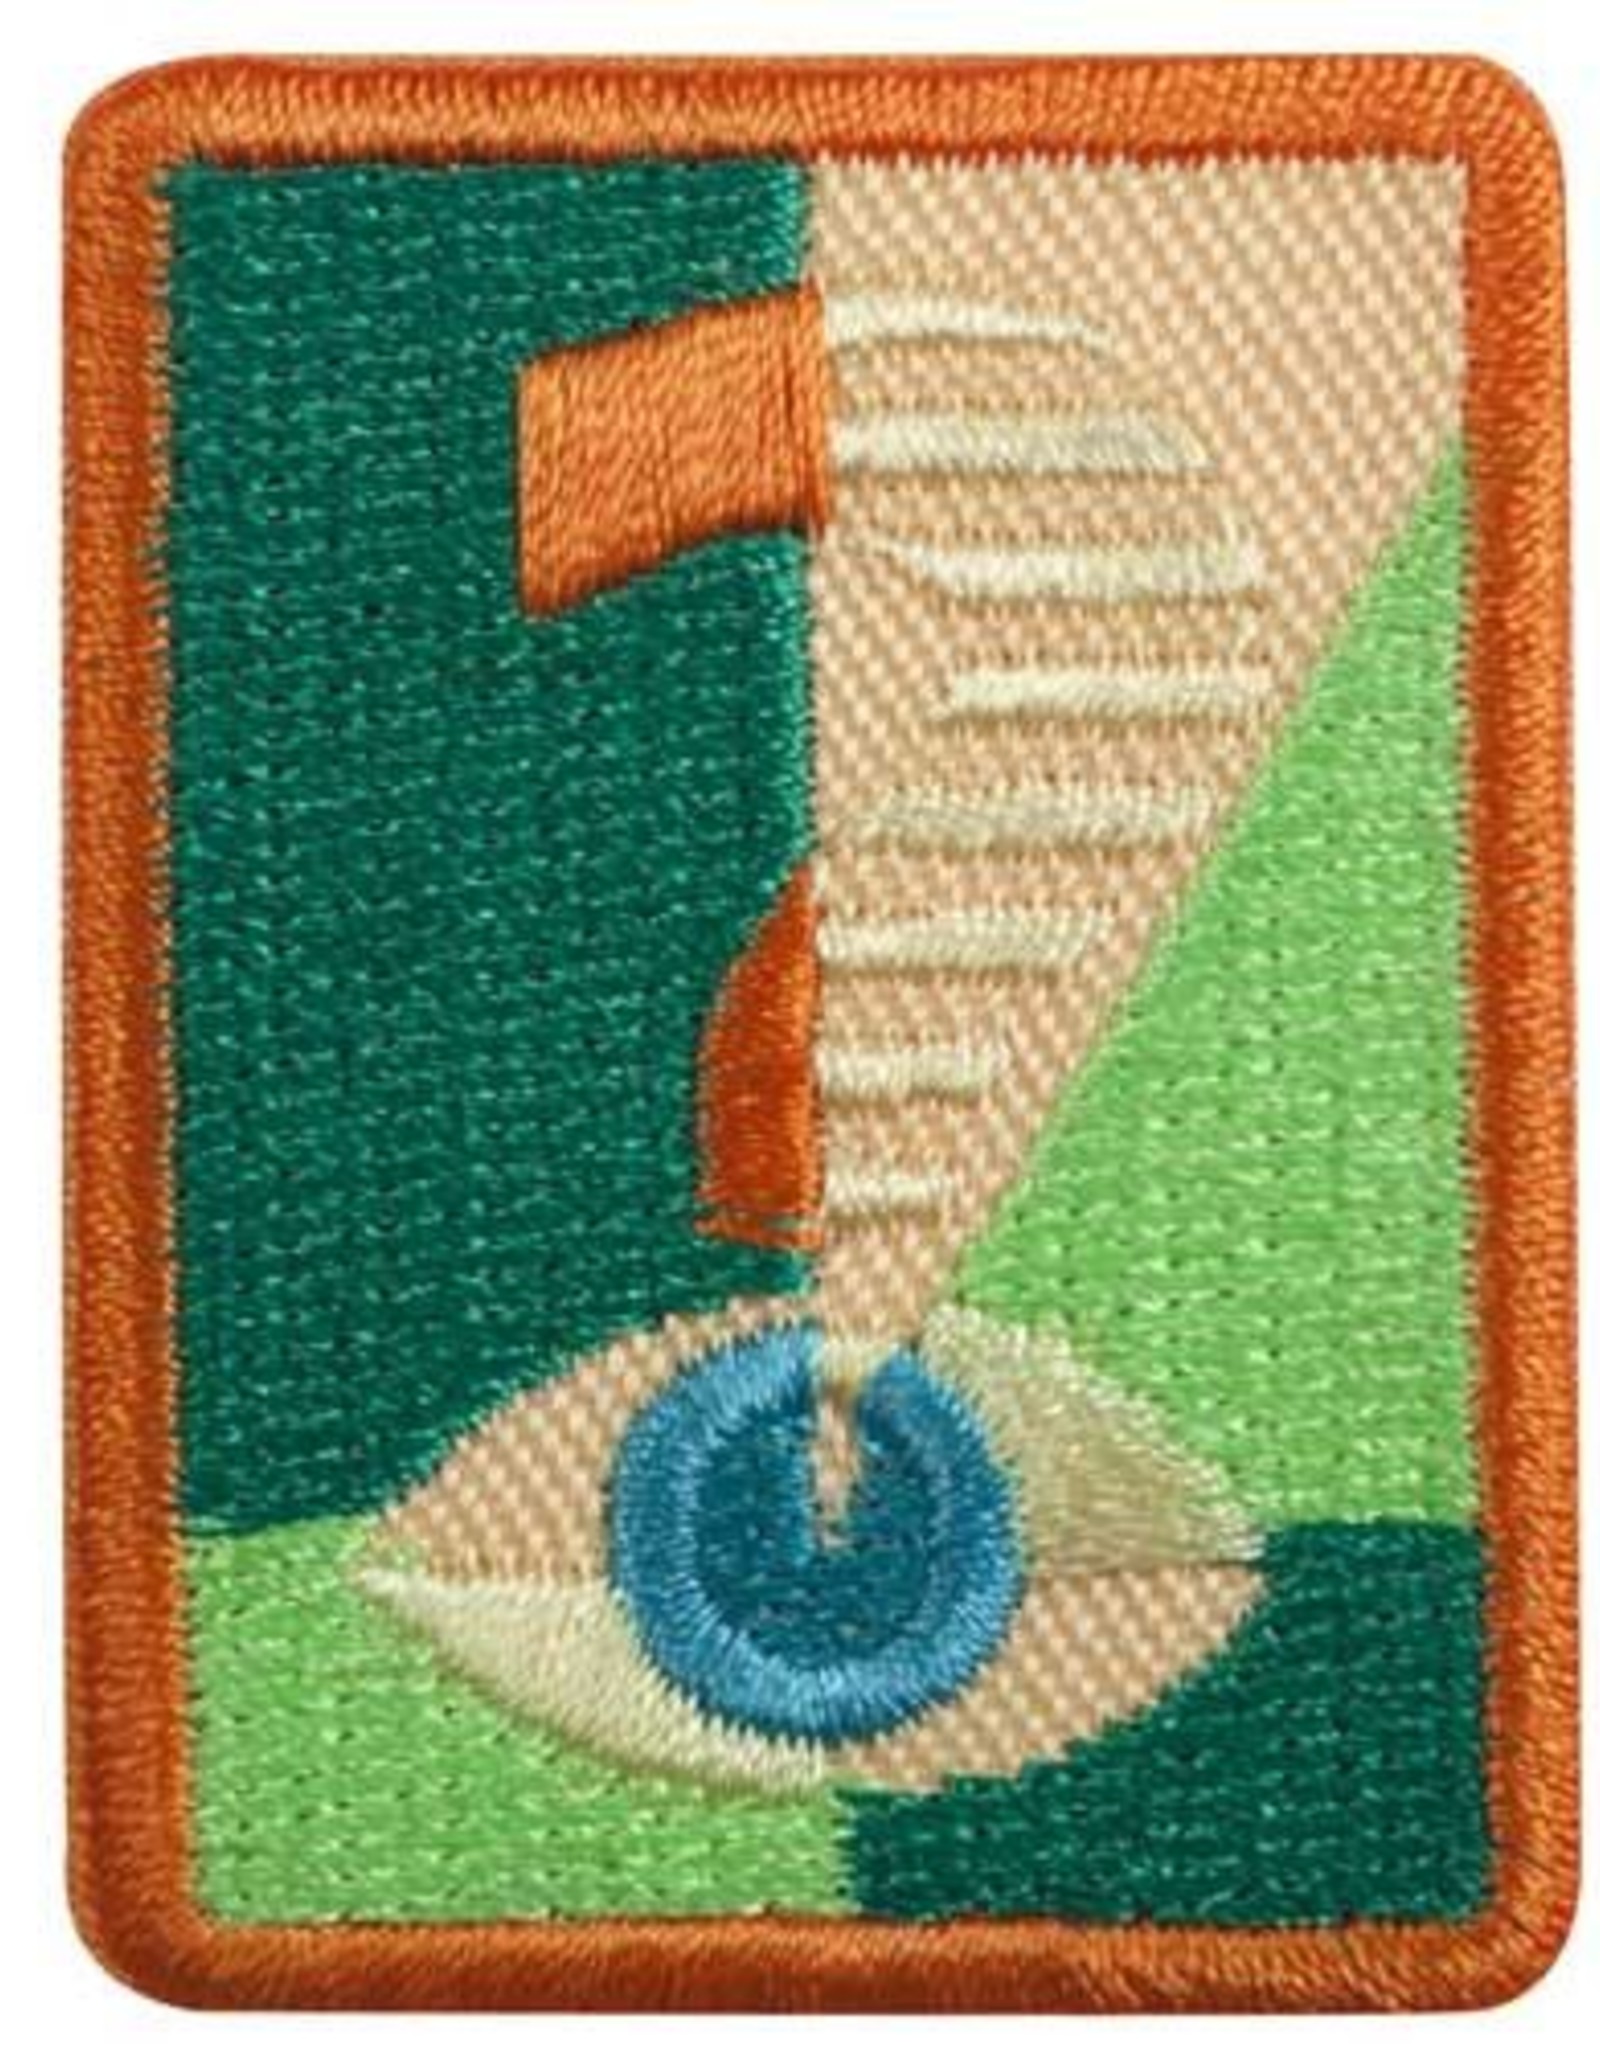 GIRL SCOUTS OF THE USA Senior Truth Seeker Badge